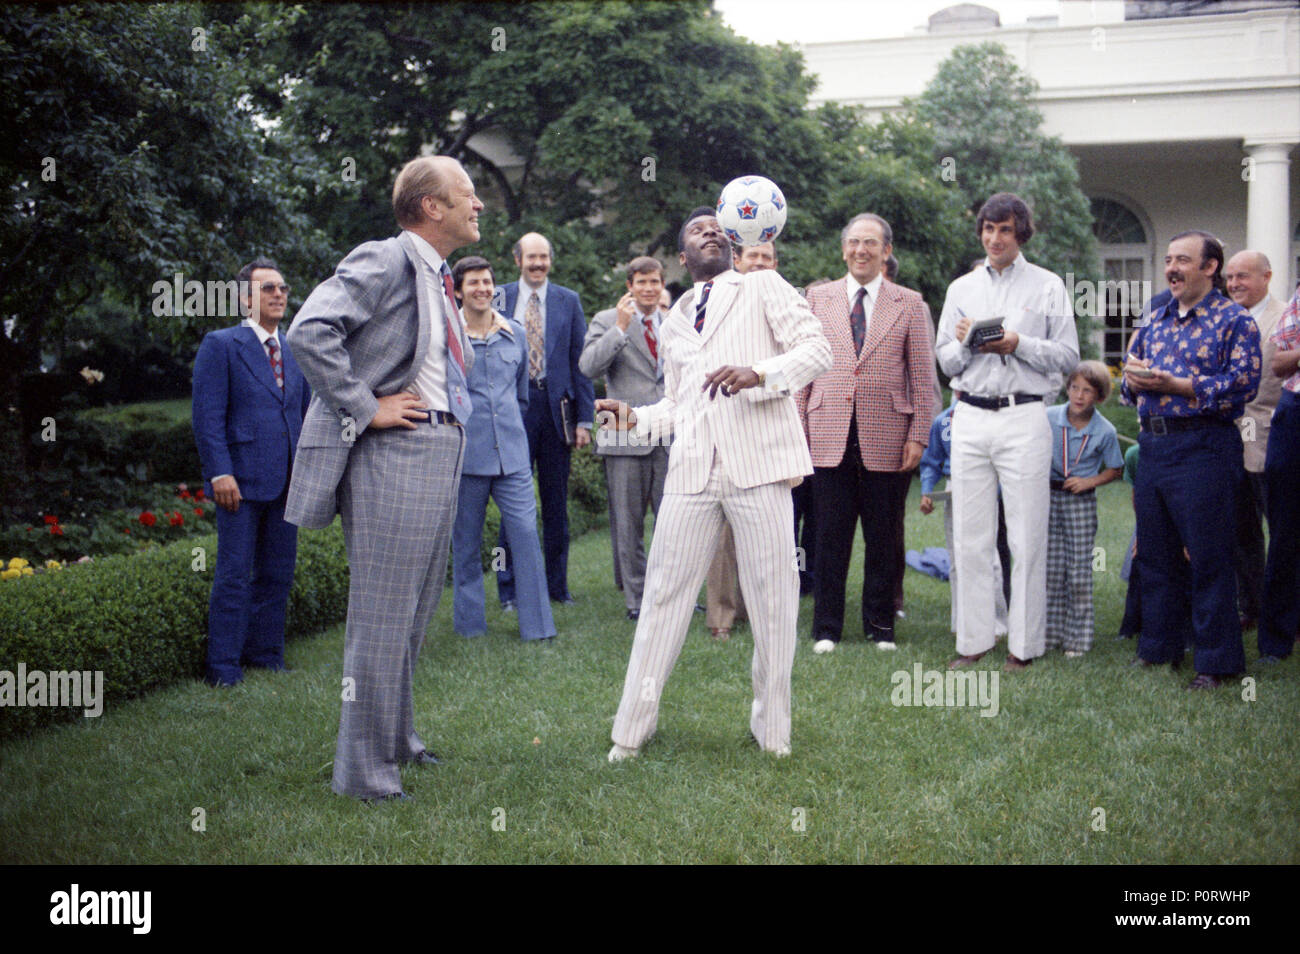 1975, June 28 – Rose Garden – The White House –  Gerald R. Ford, Edson Arantes 'Pele' Nacimento, Amb. Joao Augusto de Araujo Castro, Others – Pele juggling soccer ball on foot and head – Brazilian Soccer Player; Ambassador from Brazil to the U.S. Stock Photo